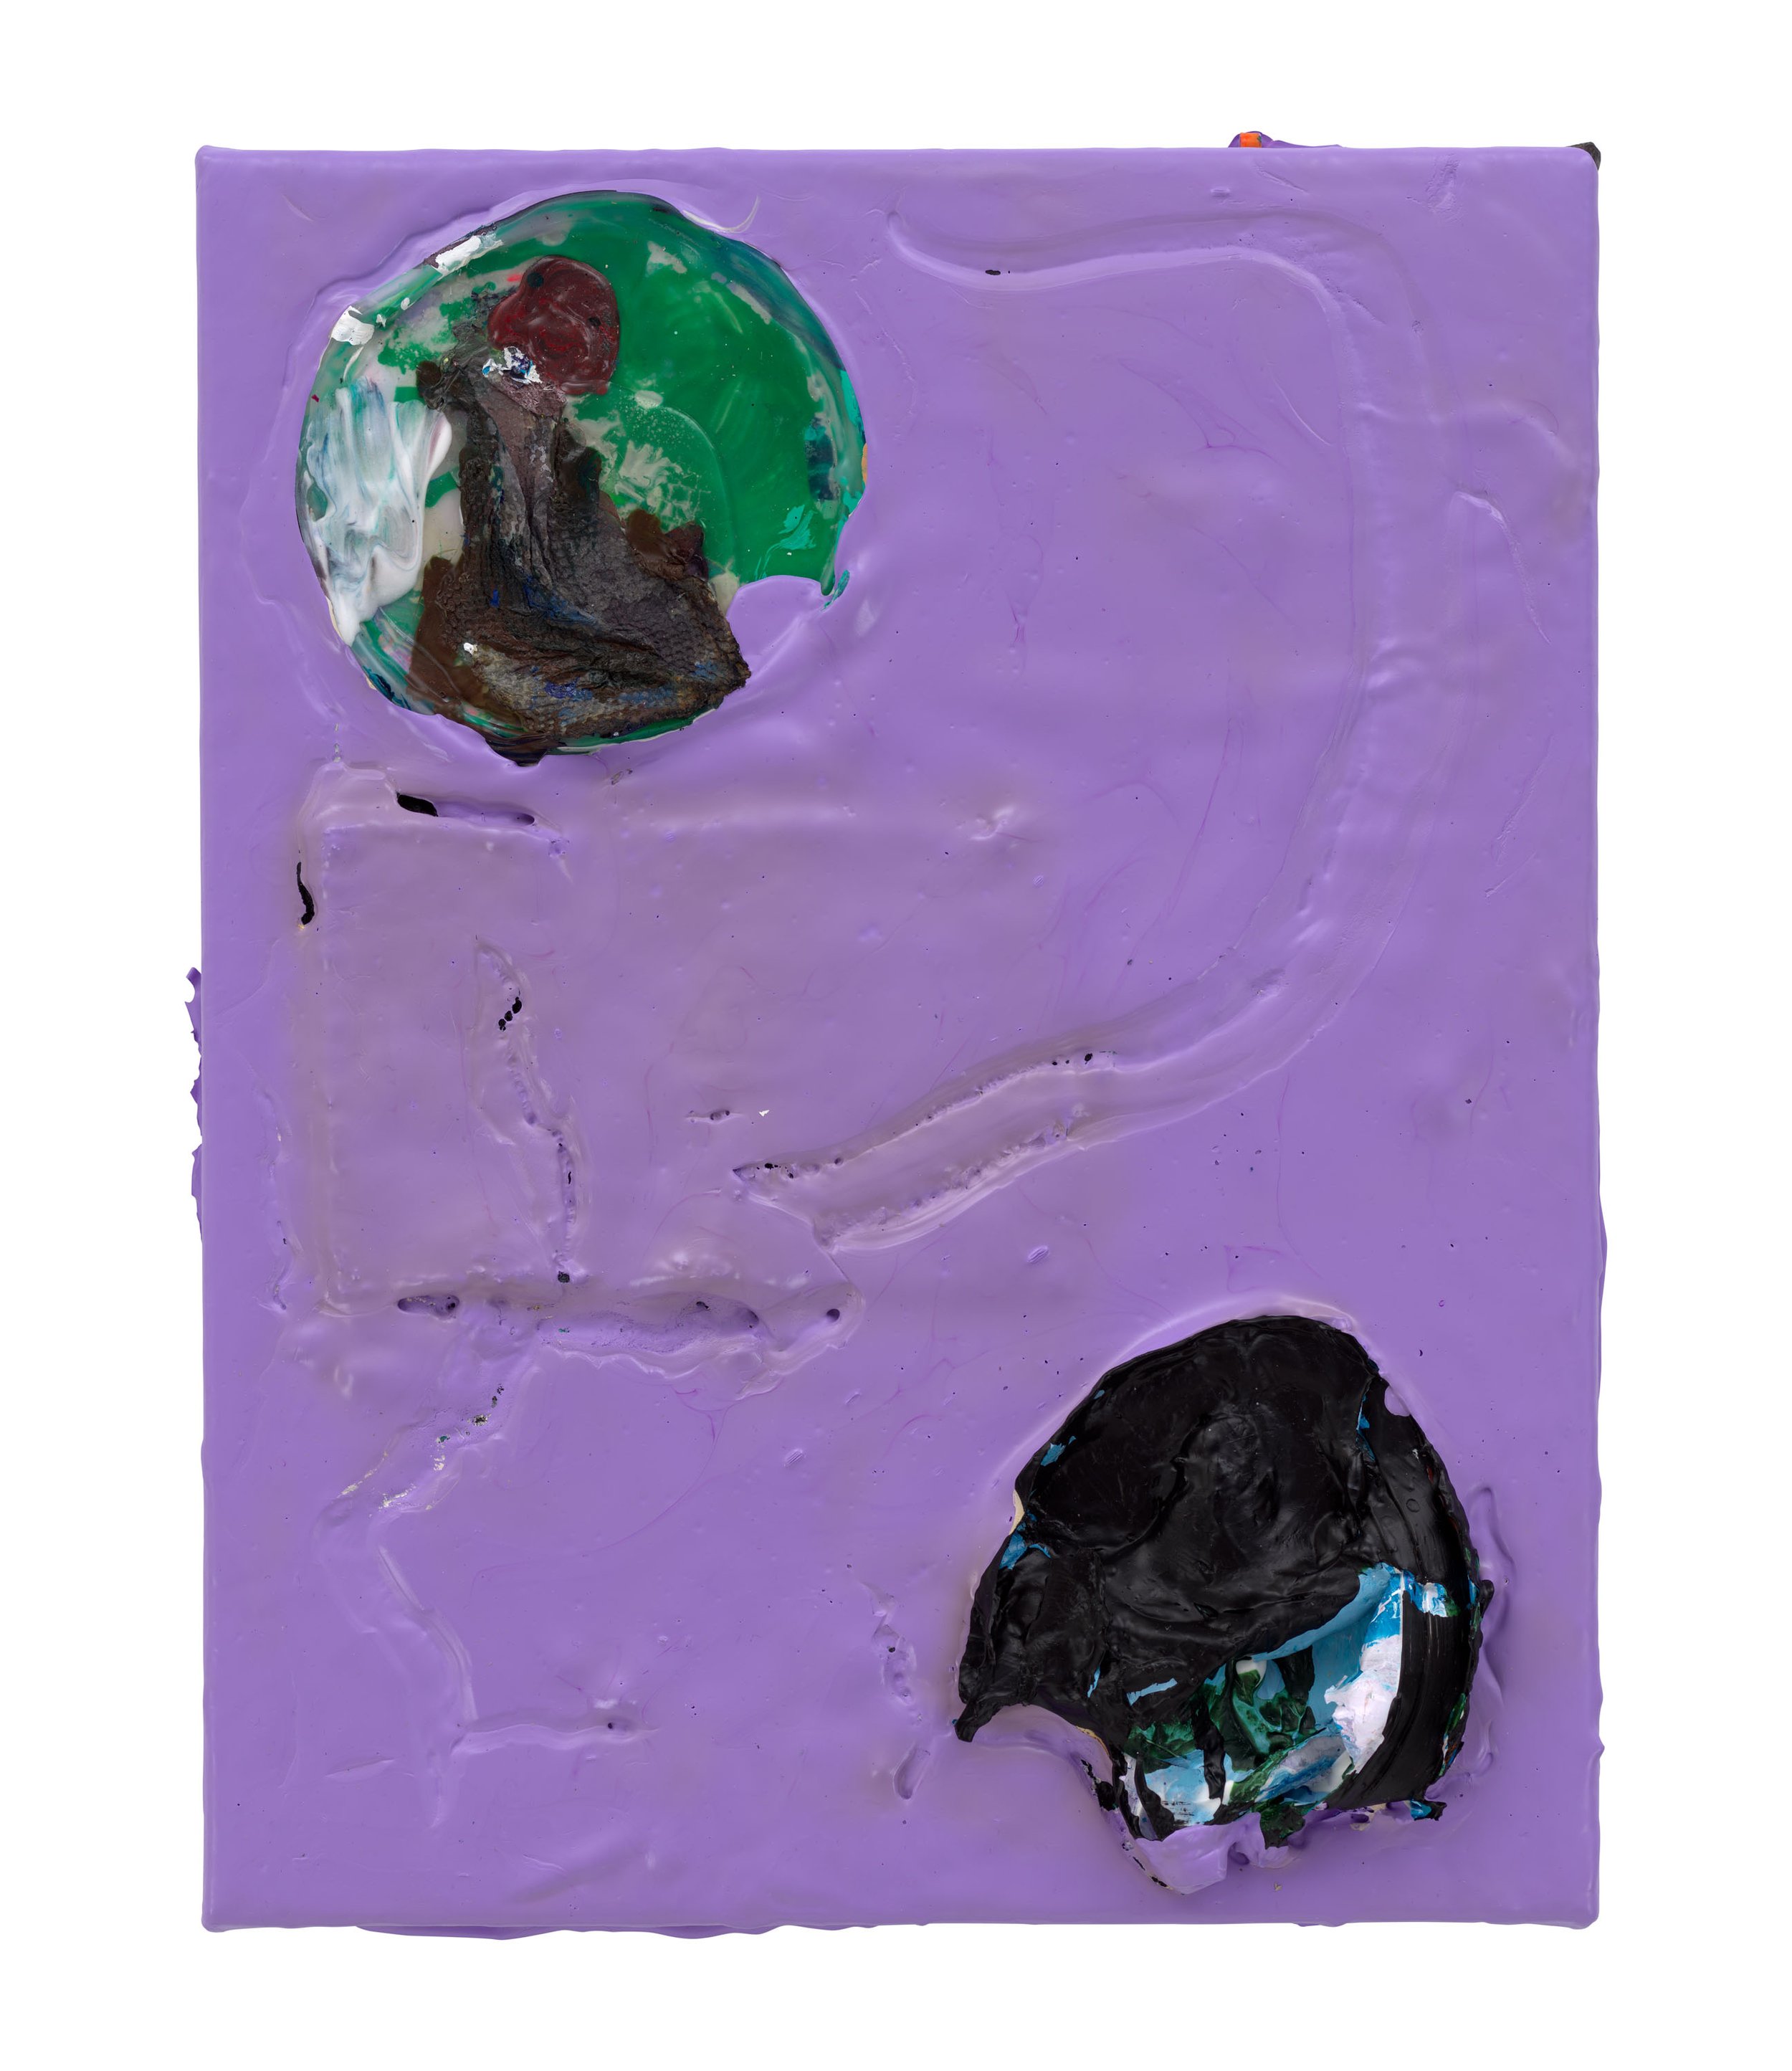  Drew Beattie  Shadowed Lavender   2022 acrylic, paper towel, and plastic lids on canvas 14 x 11 inches 